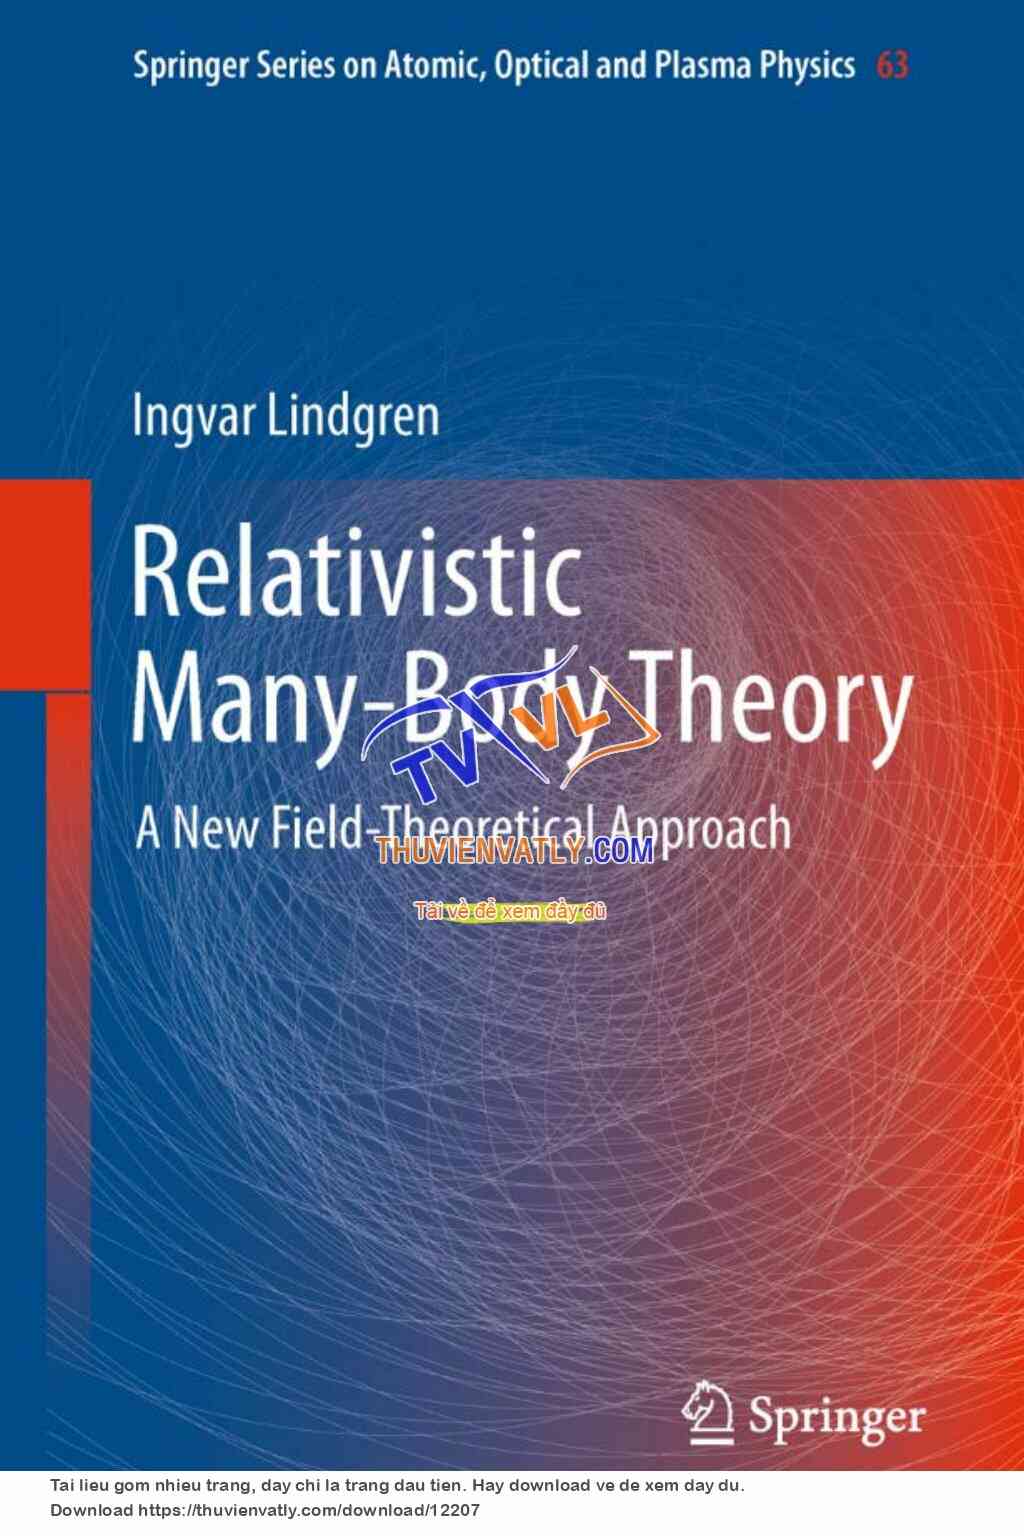 [2011] Relativistic Many-Body Theory A New Field-Theoretical Approach